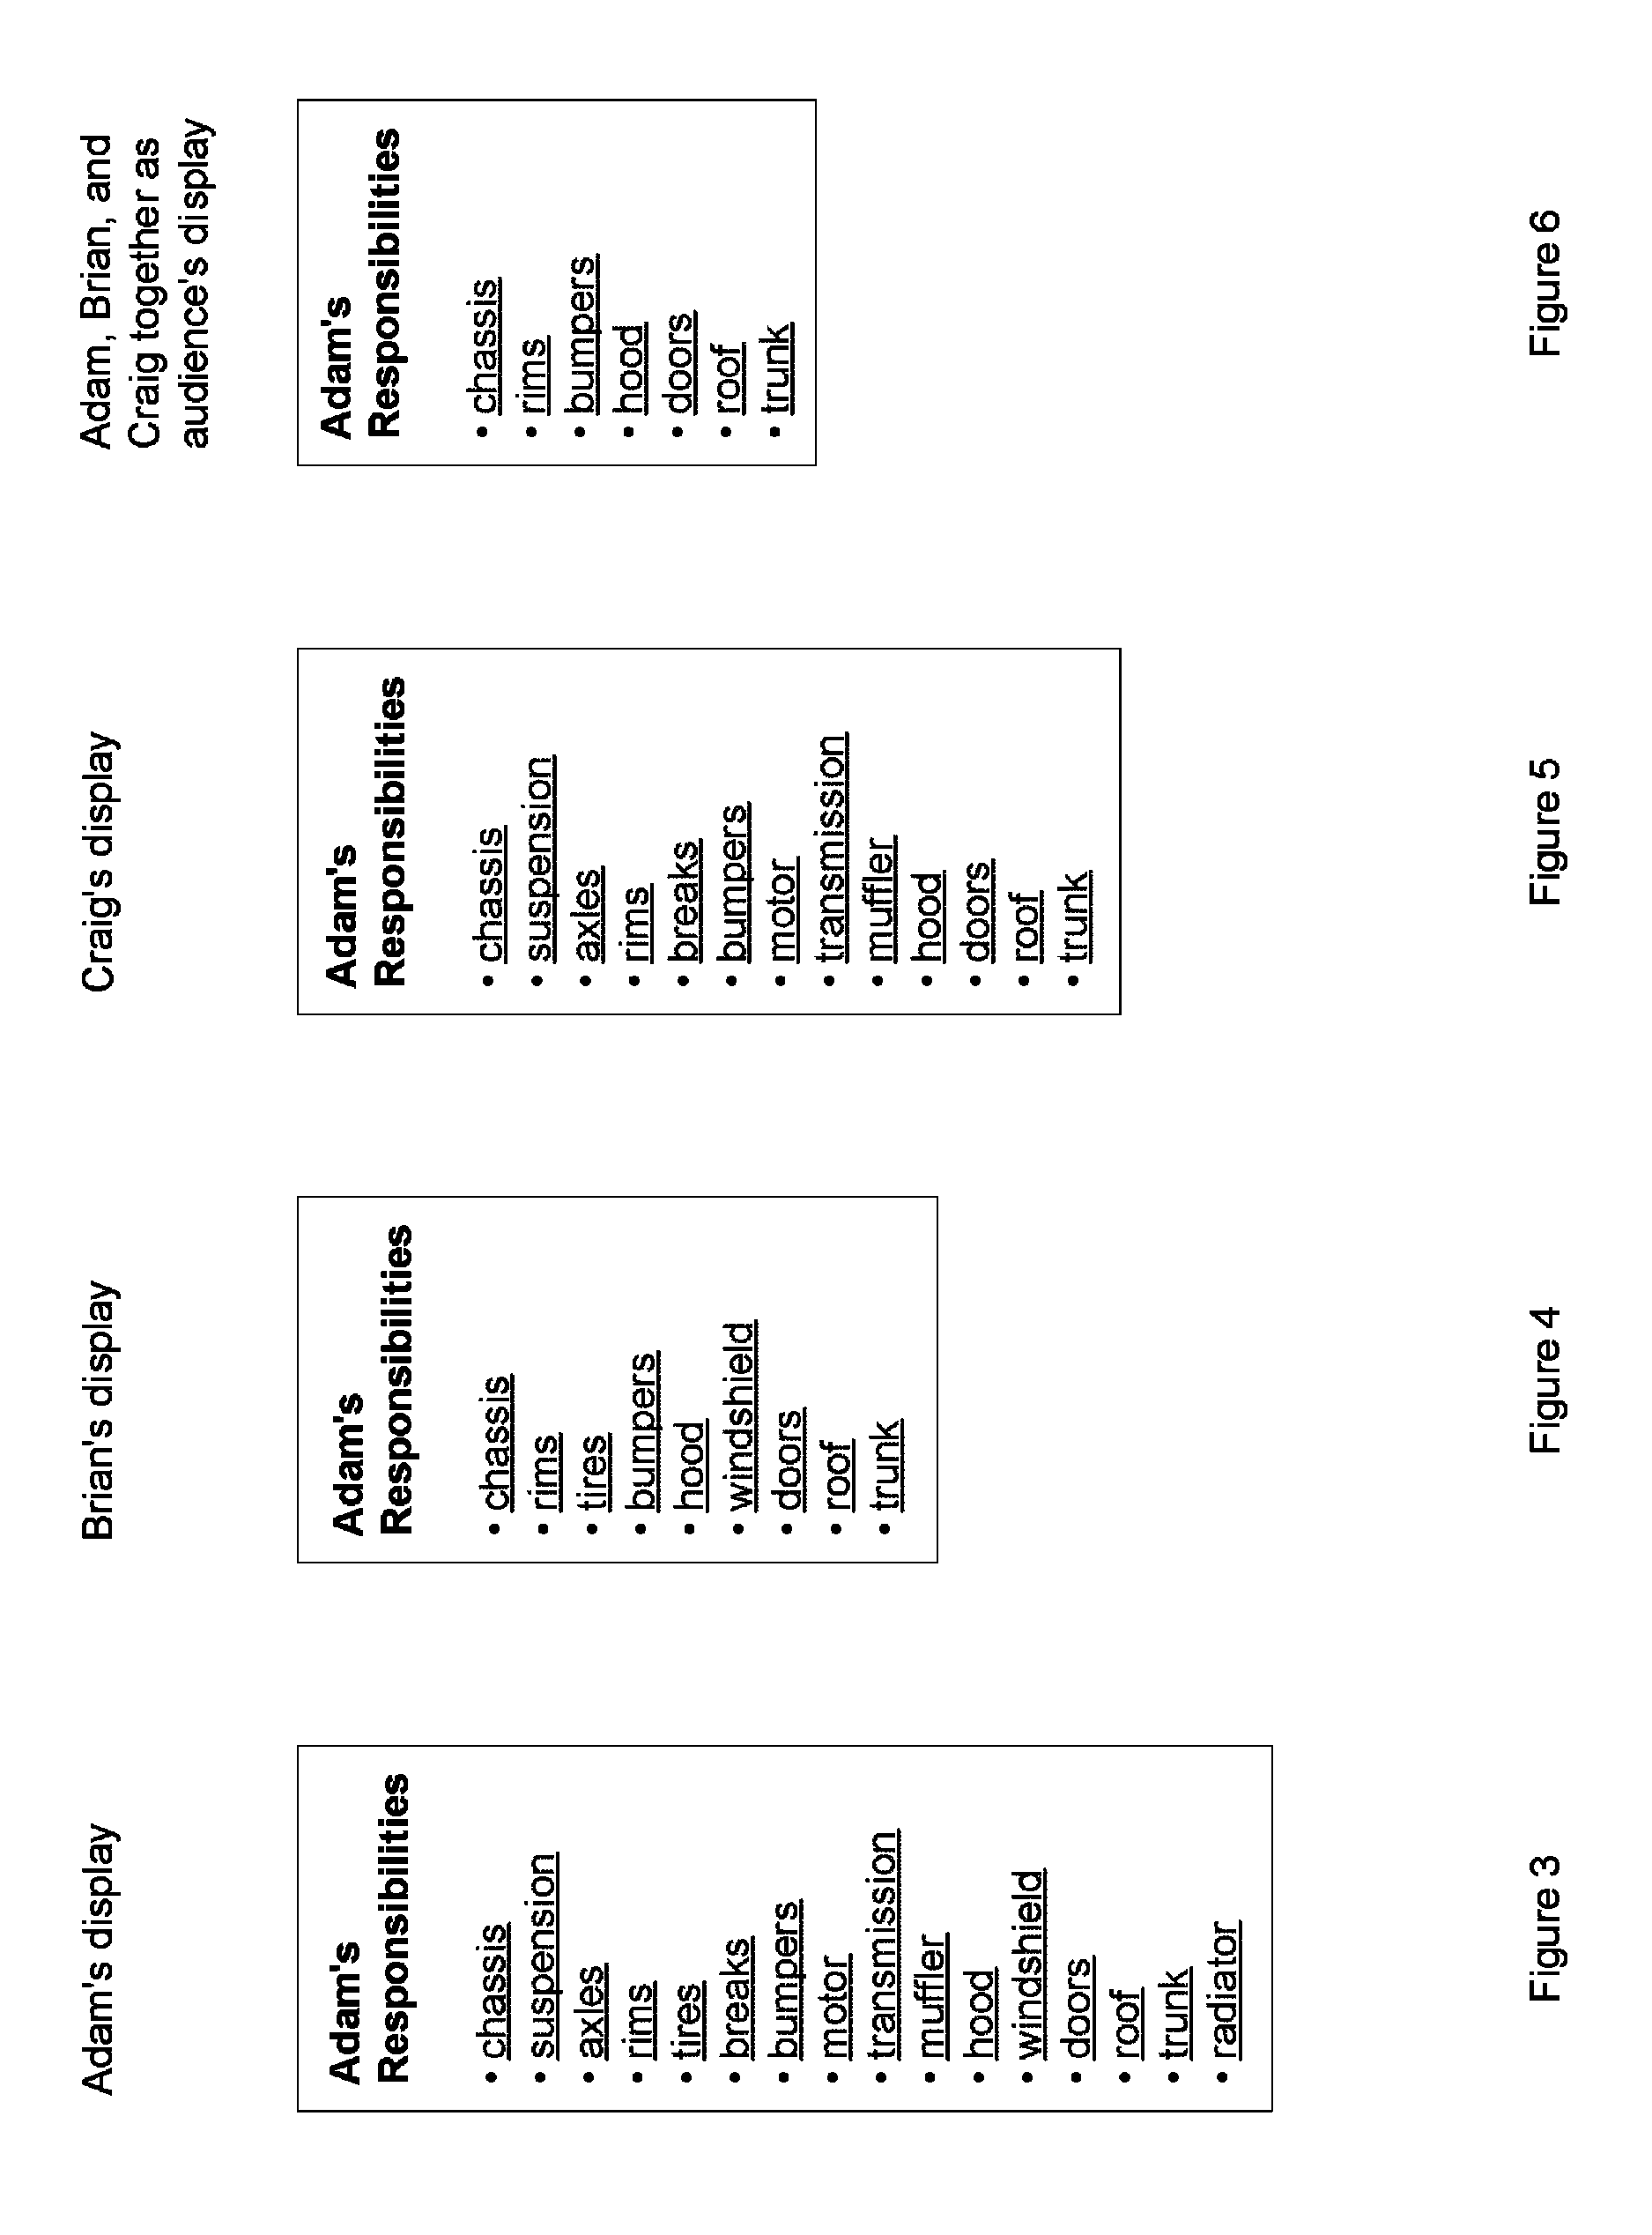 User interface driven access control system and methods for multiple users as one audience